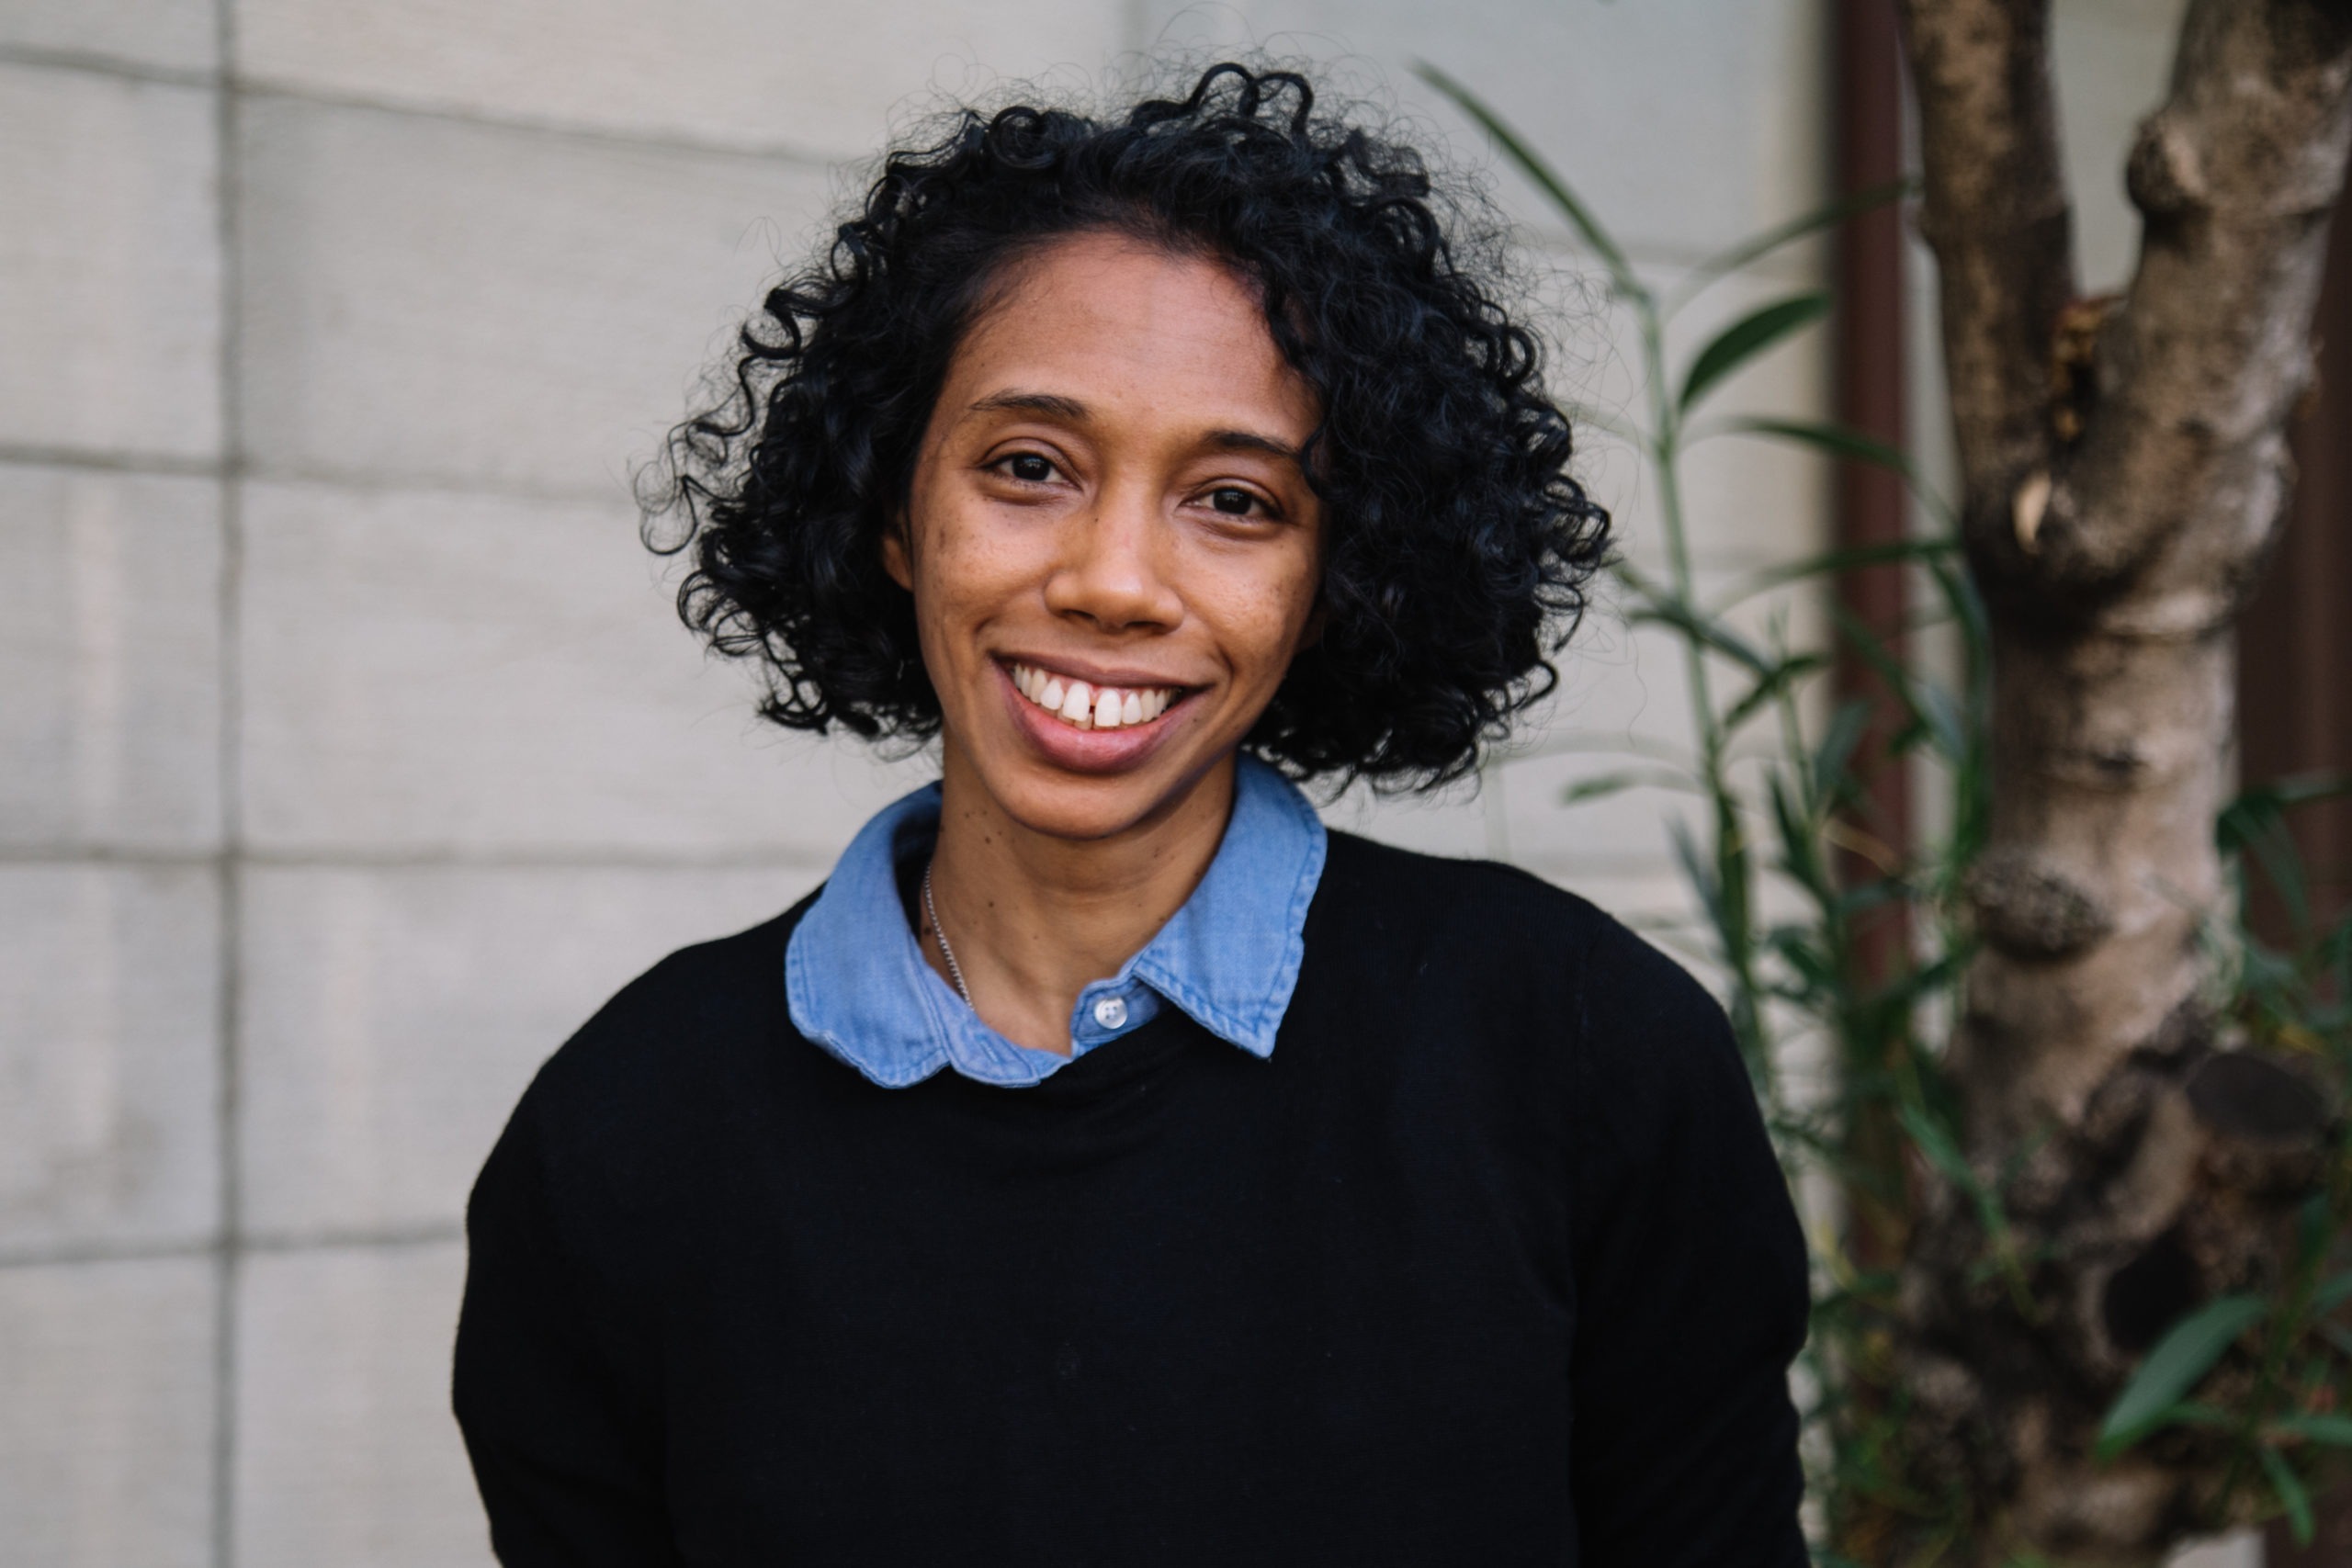 A person with short curly hair smiles warmly at the camera. They are wearing a black sweater over a blue collared shirt. The background, reminiscent of Berkeley Journalism's dynamic environment, features a gray brick wall and some greenery.